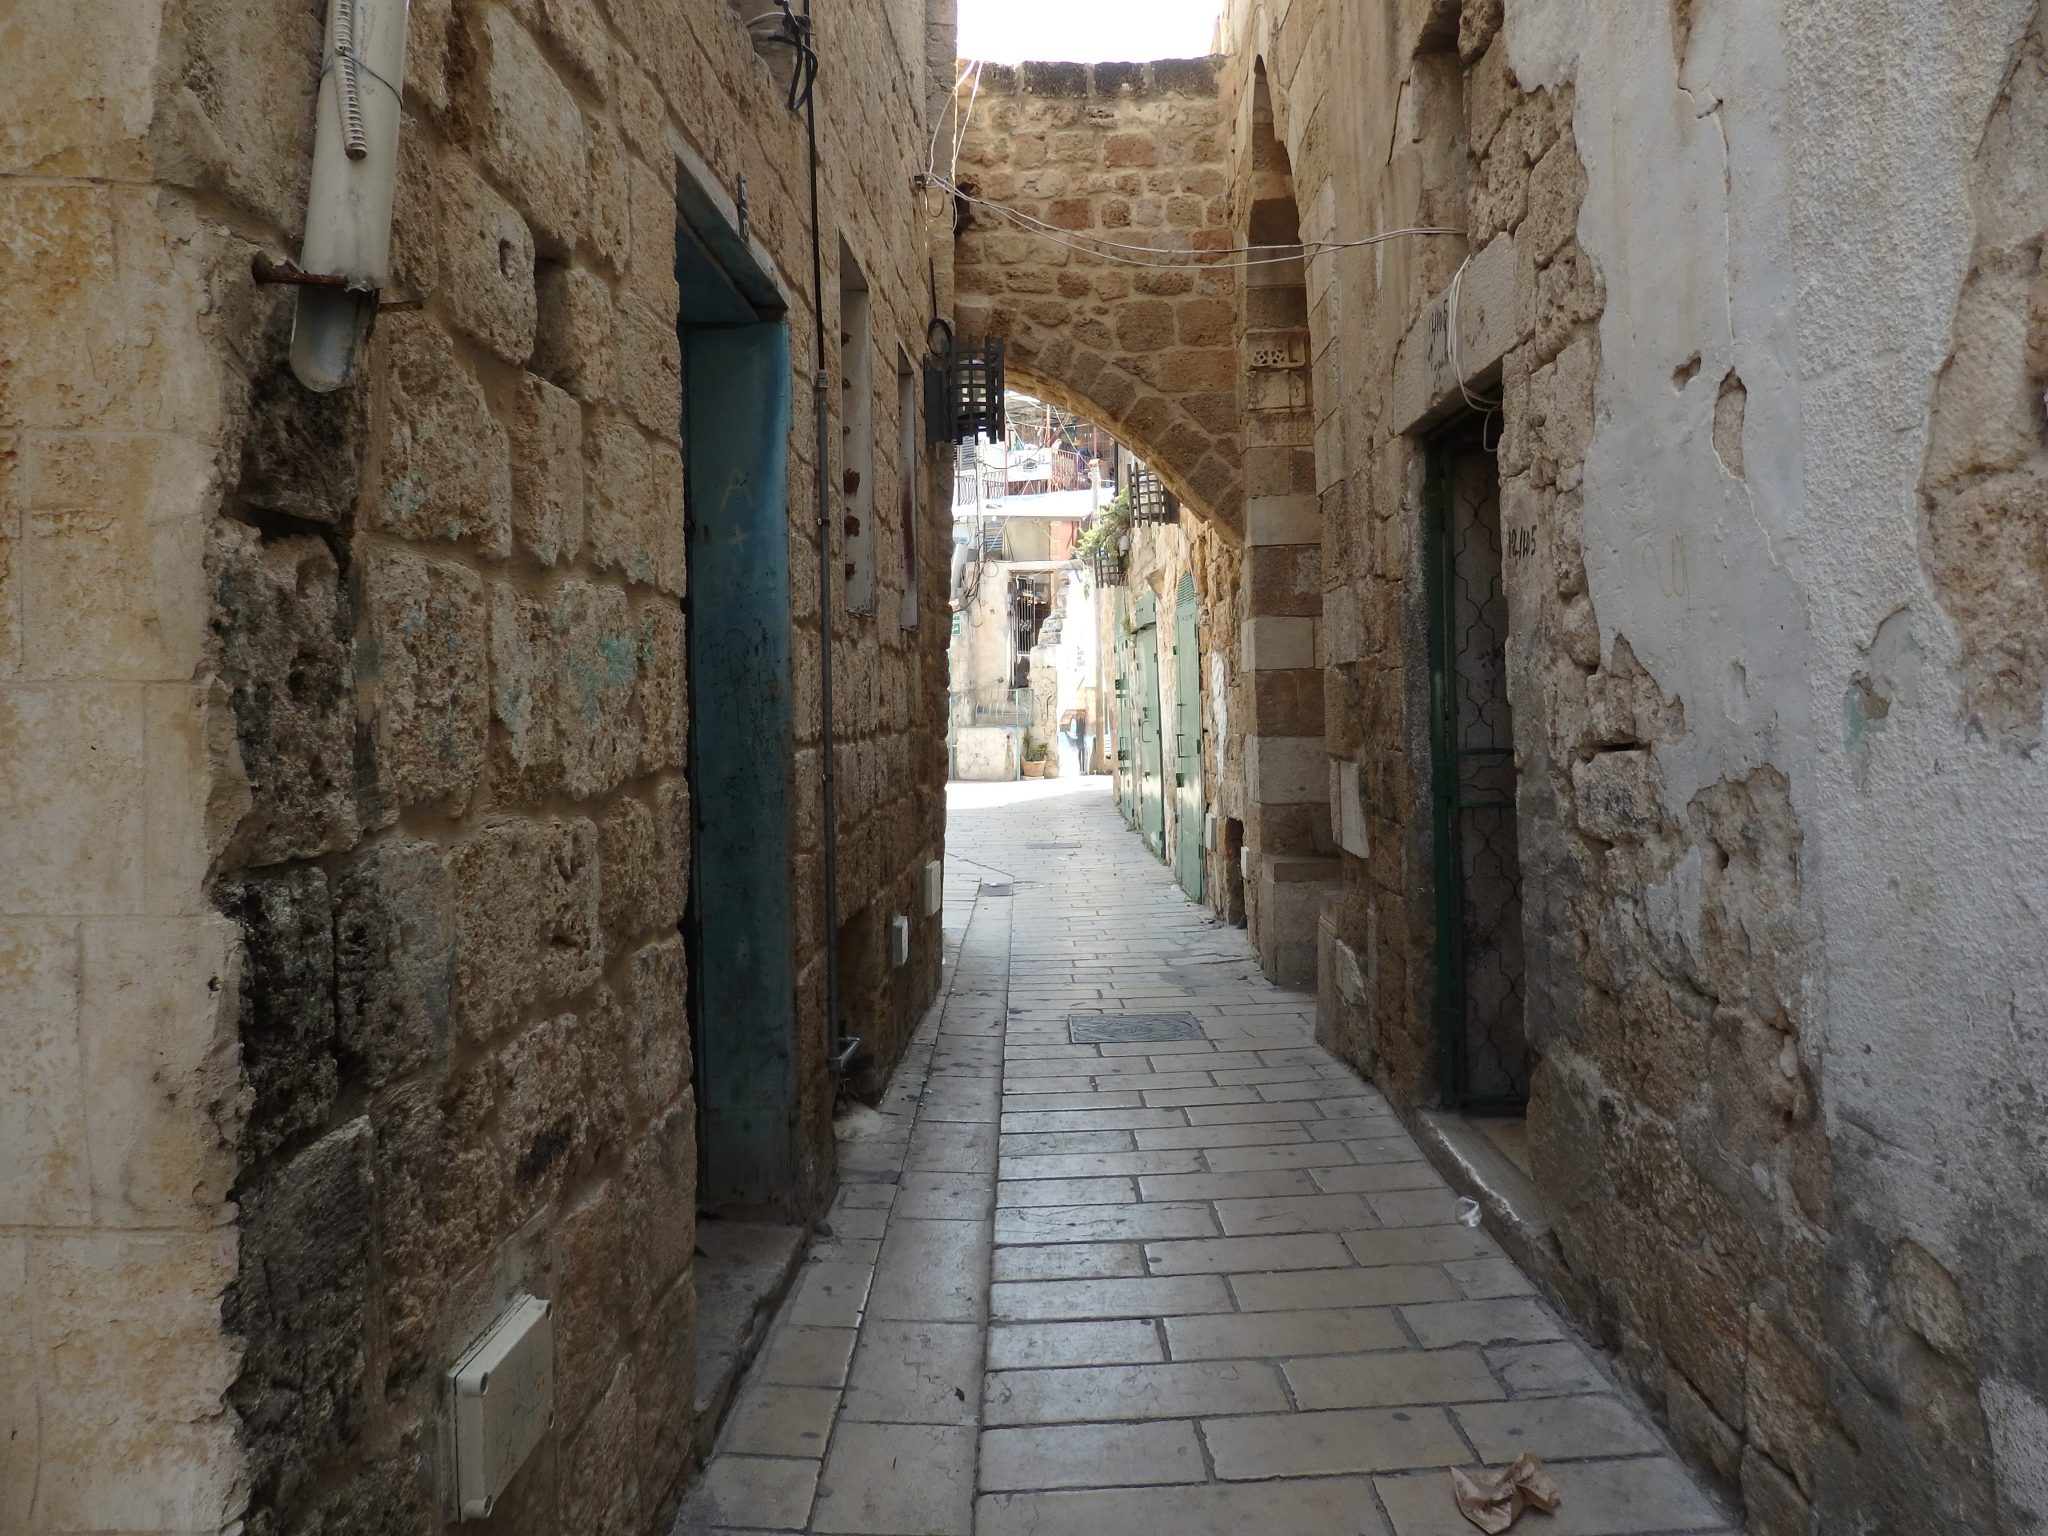 A narrow street in Akko old city shows remnants of its history.